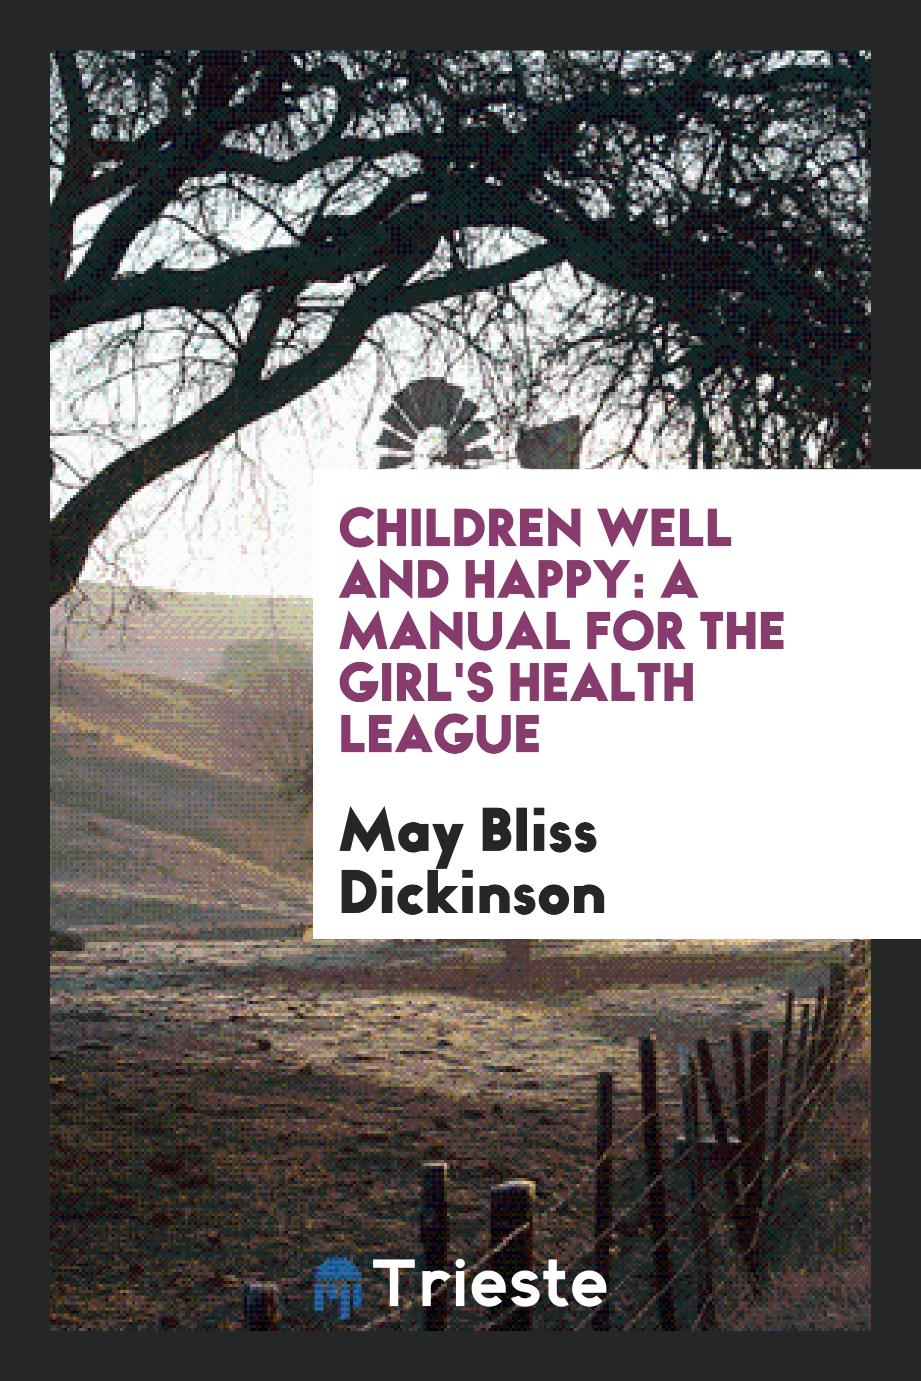 Children Well and Happy: A Manual for the Girl's Health League